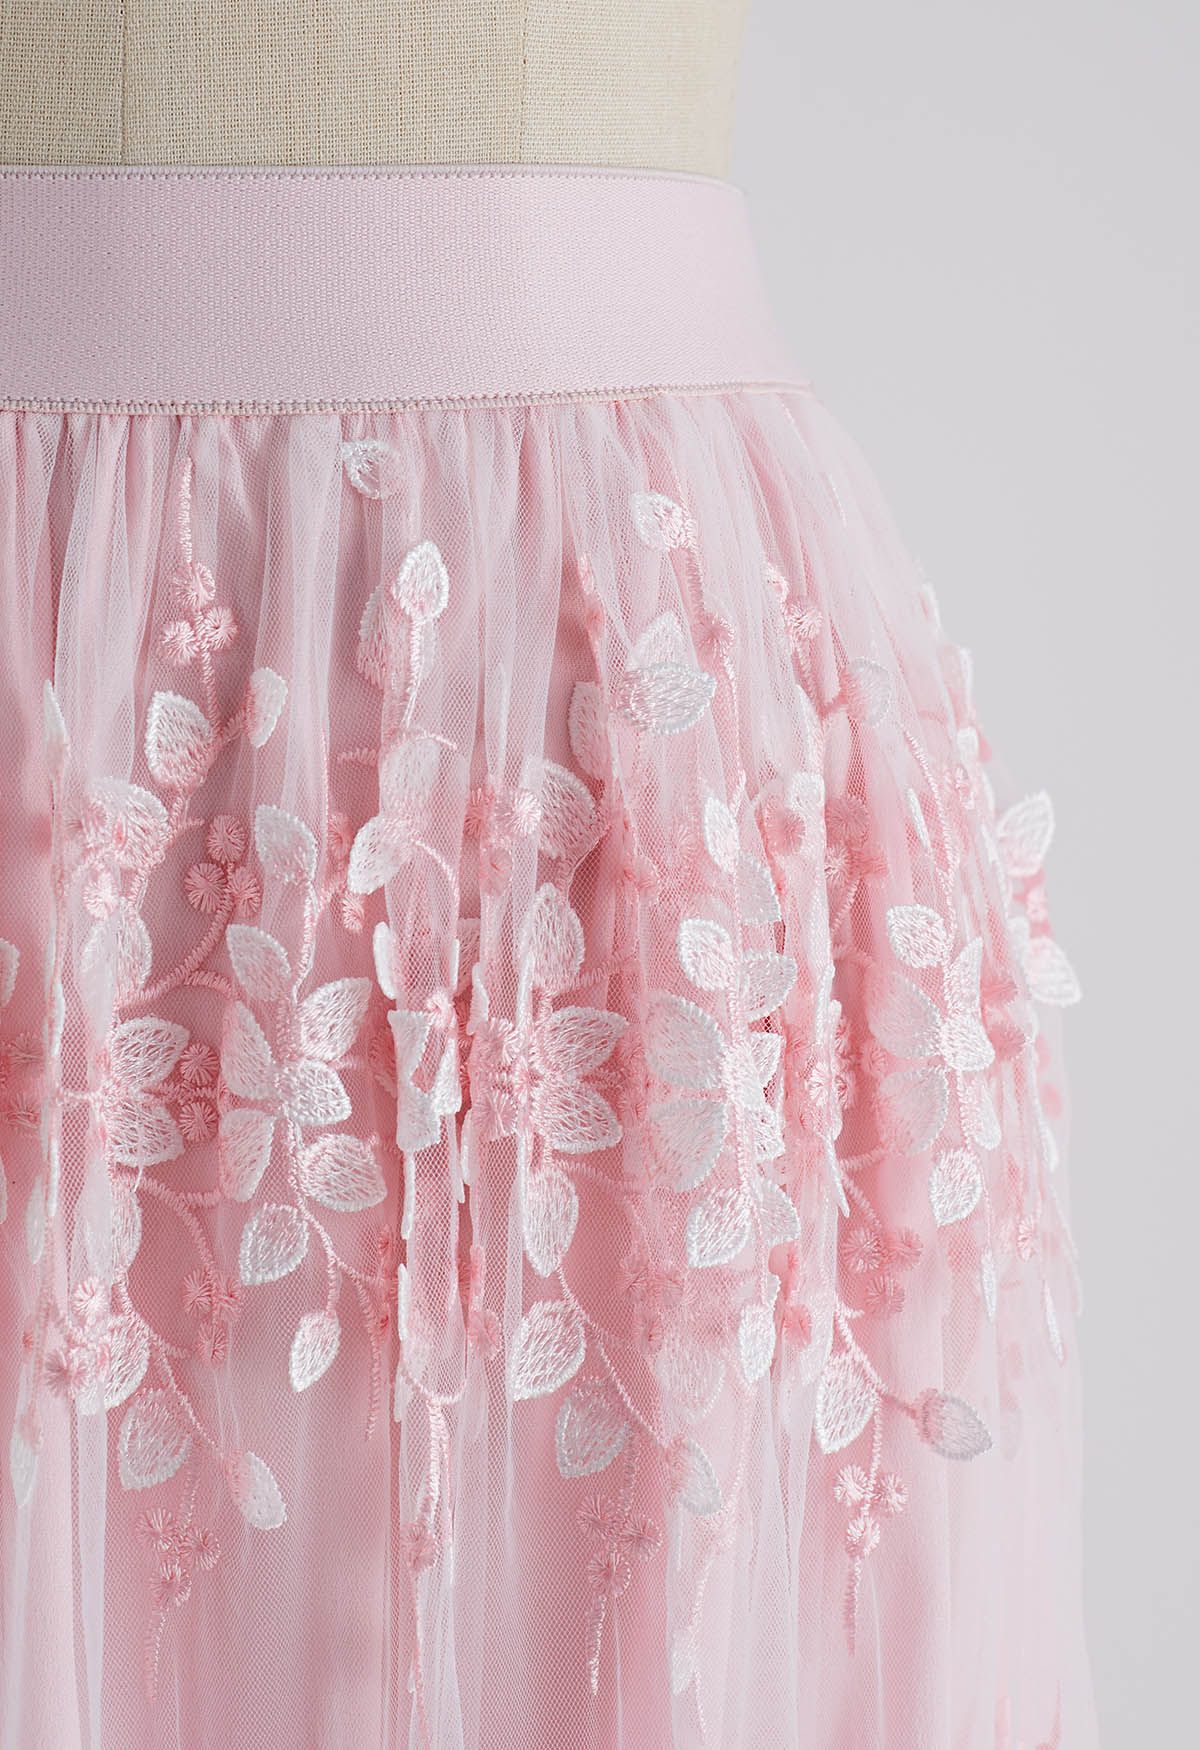 3D Vine Embroidered Mesh Tulle Skirt in Pink